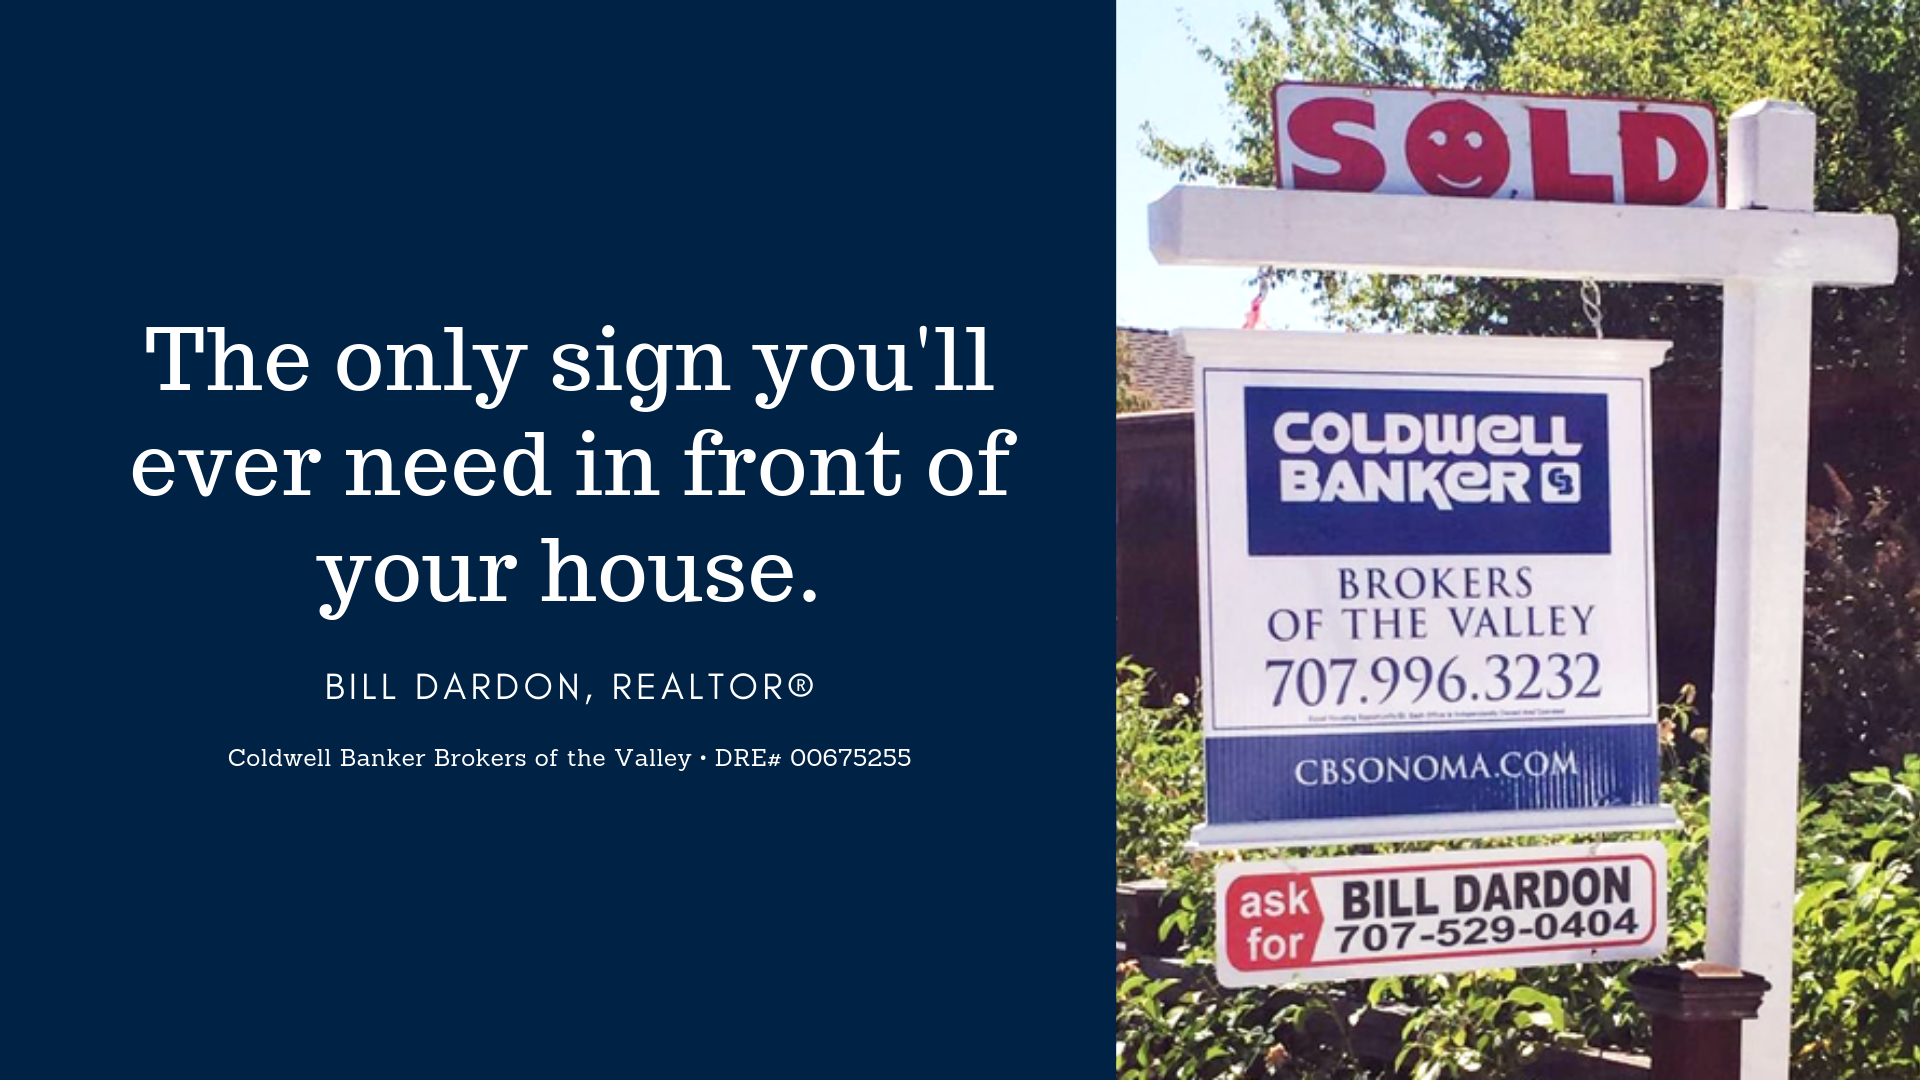 Bill's "just sold" sign in front of a house in sonoma